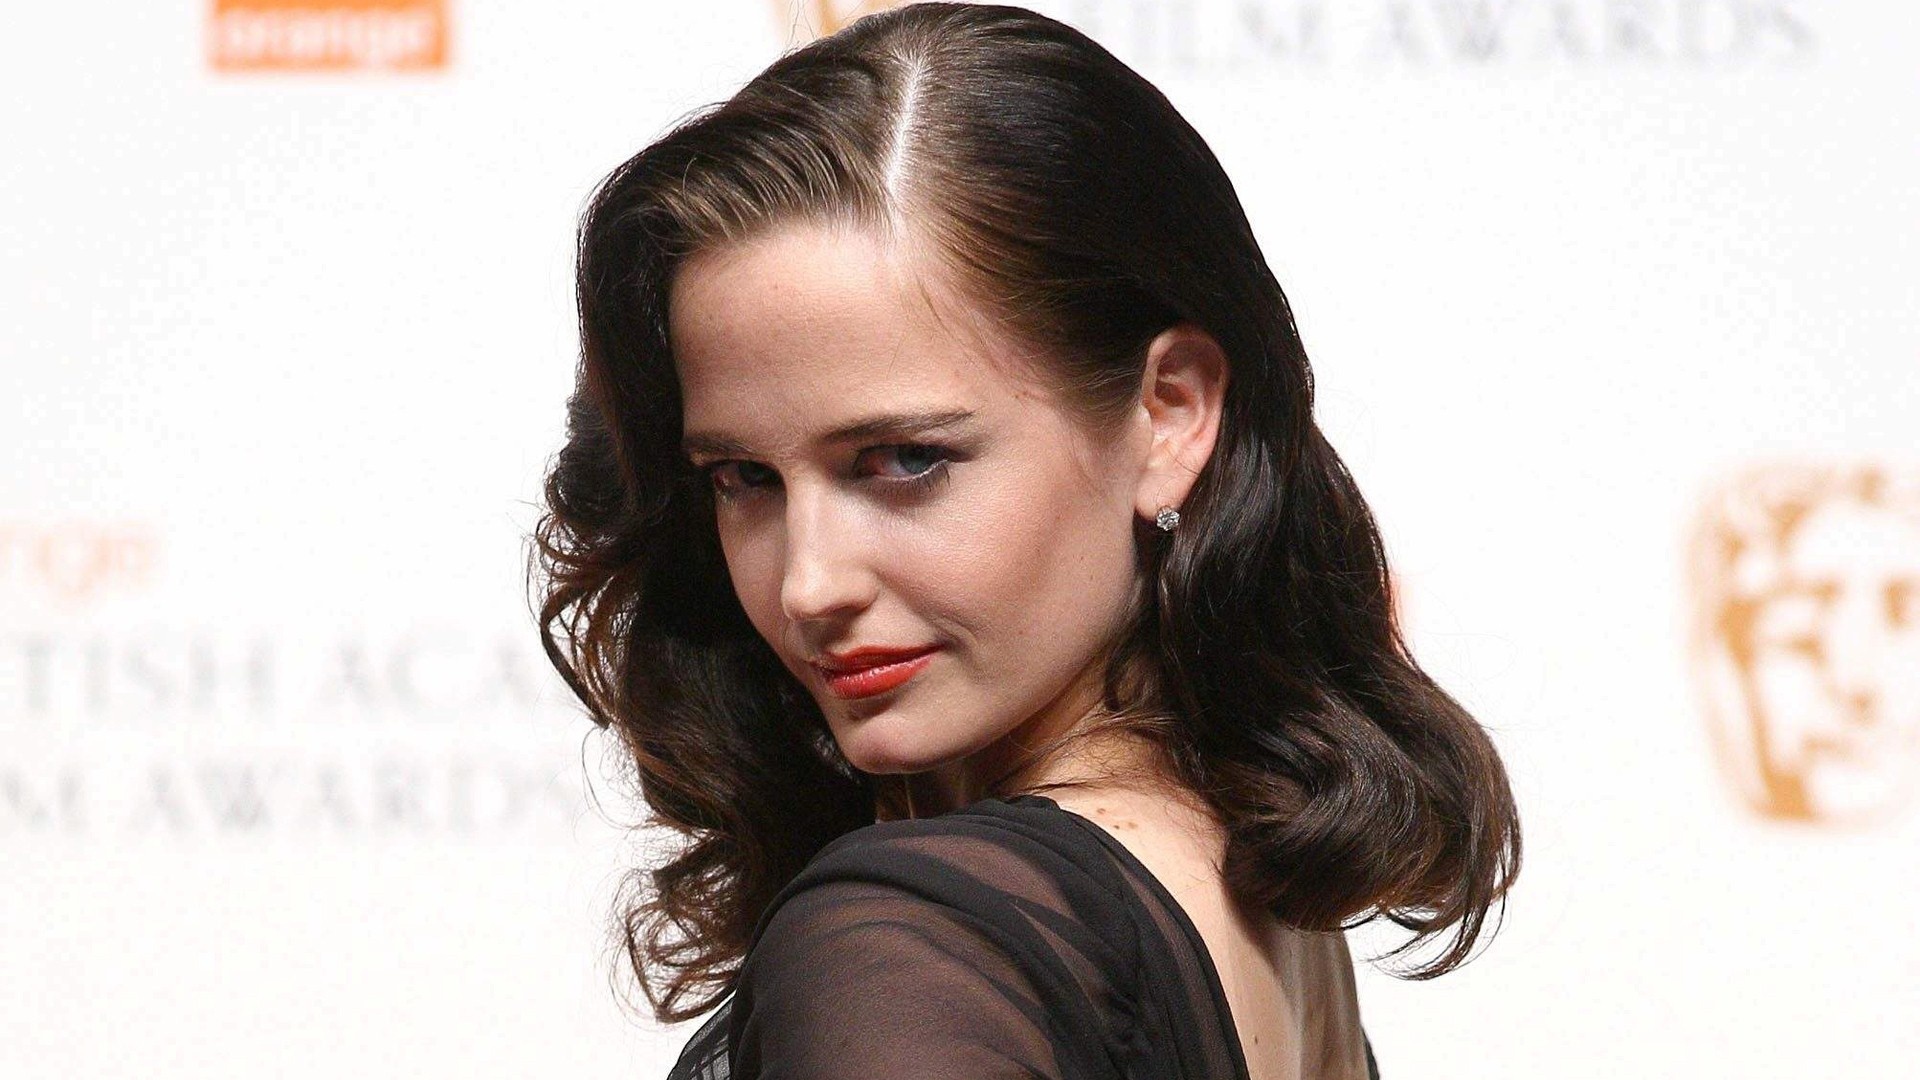 Eva Green: Began her acting career on stage in 2001 appearing in 'Turceret' and 'Jalouse En Trois Fax'. 1920x1080 Full HD Background.